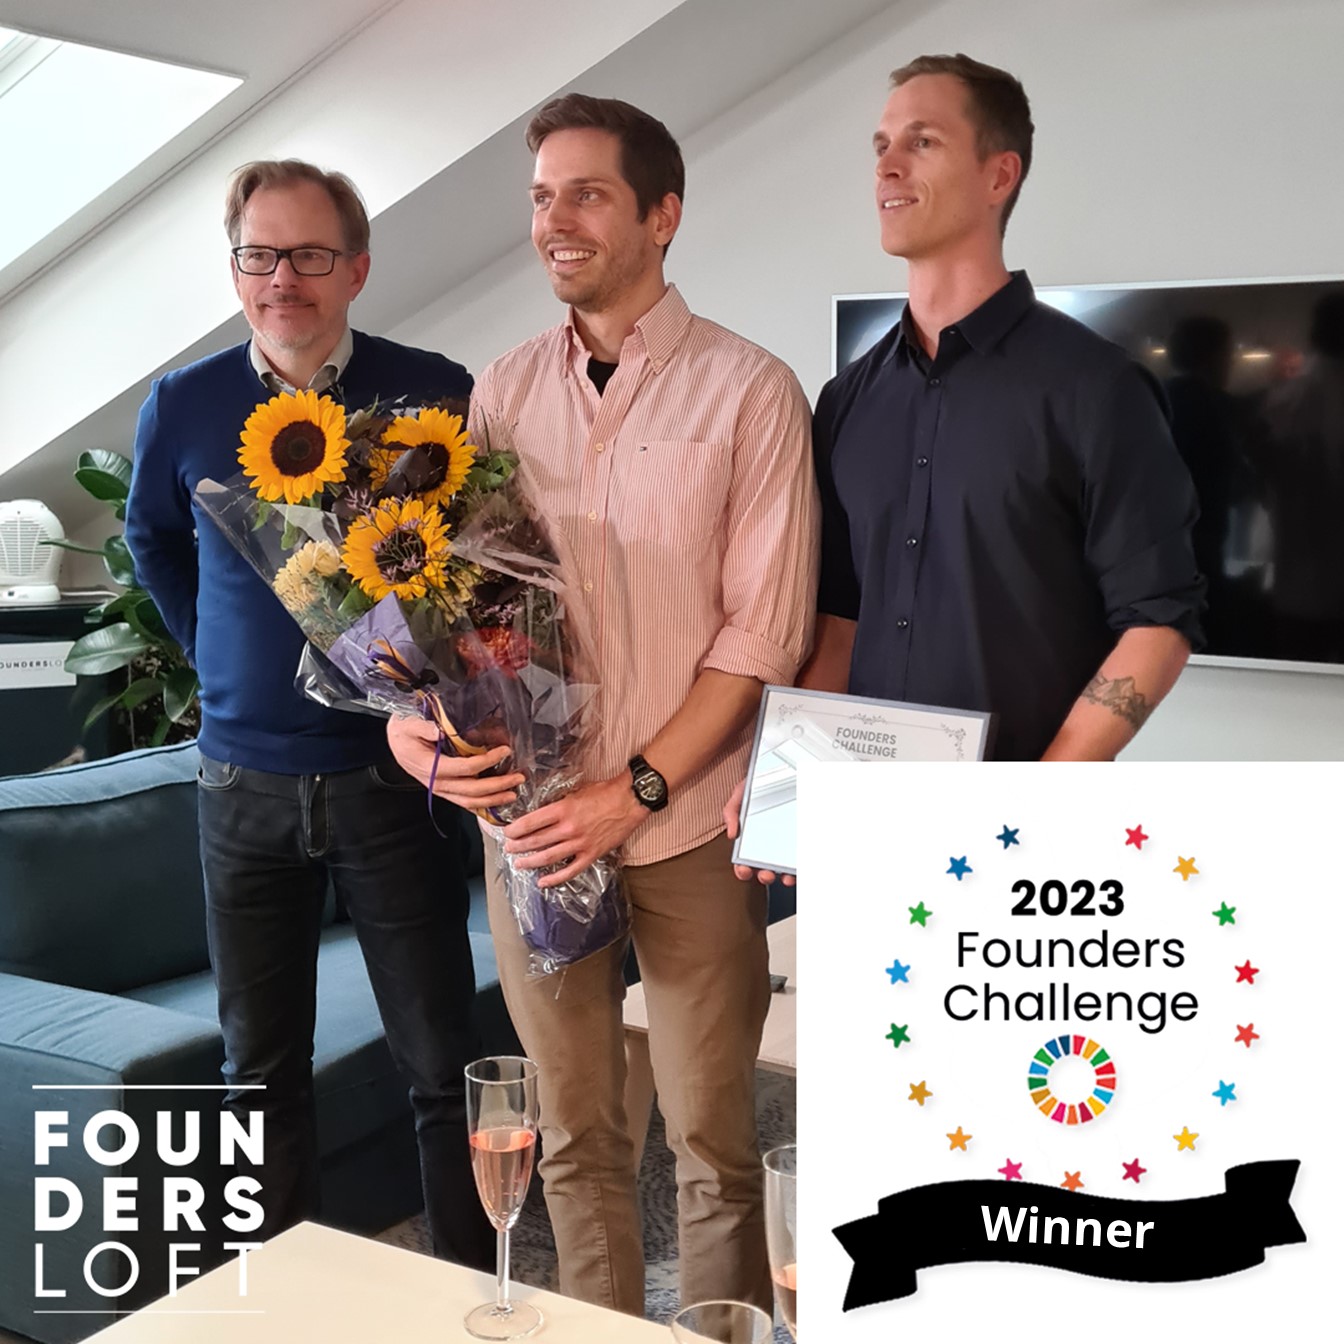 Dr. Cedrik Wiberg (CEO) and Andreas Kölling (COO) receives the Founders Challange award